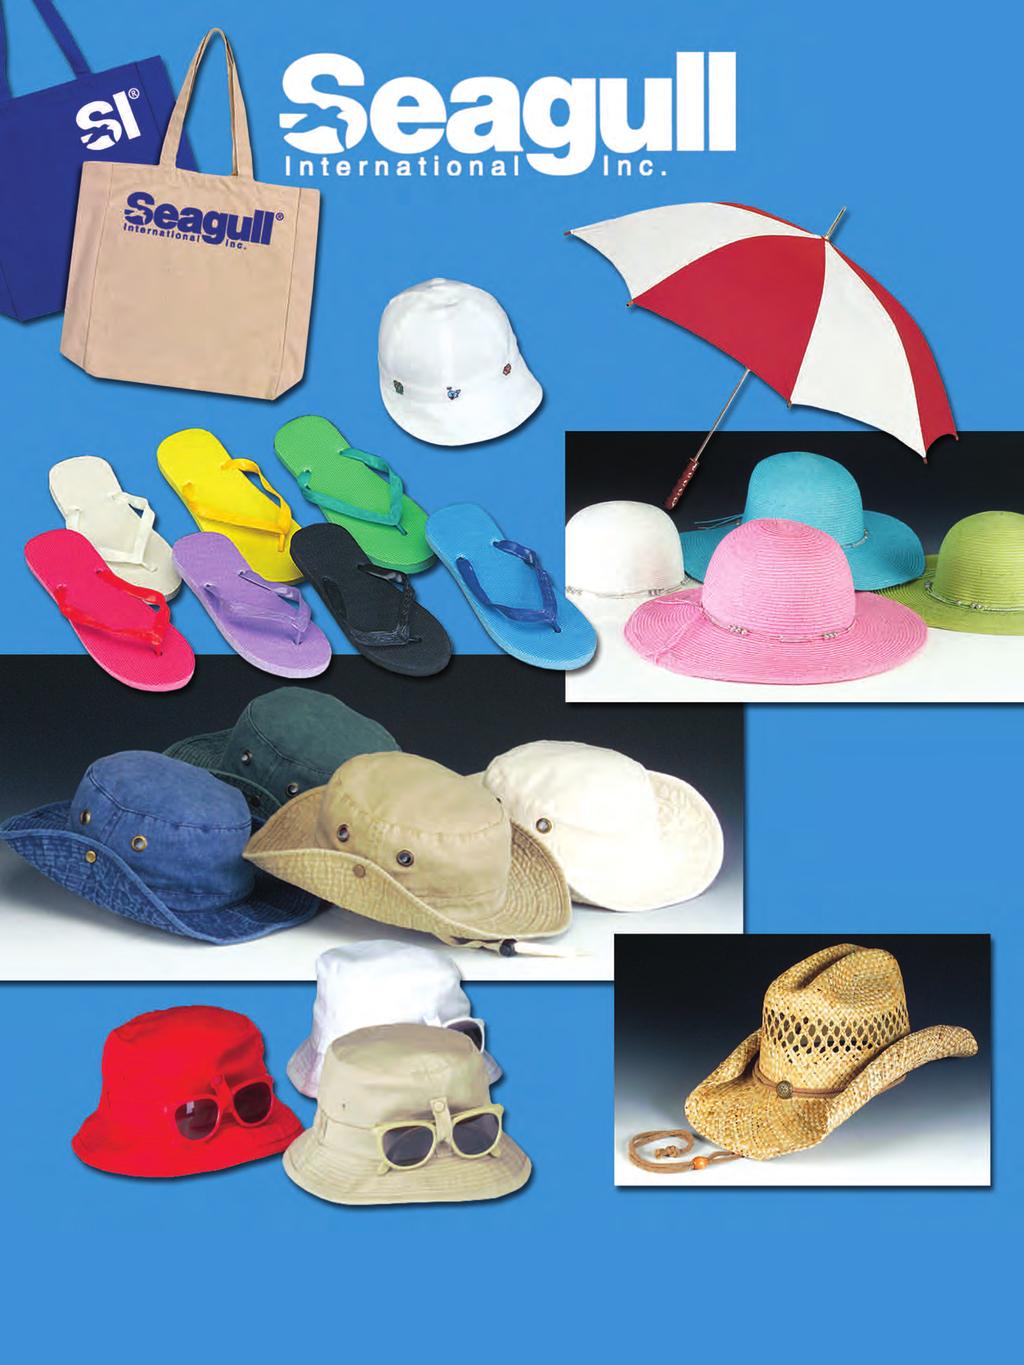 Our 57th Year Importers, Manufacturers and Exporters Headwear, Footwear, Umbrellas, Rainwear, Gloves, Scarves, Tote Bags,